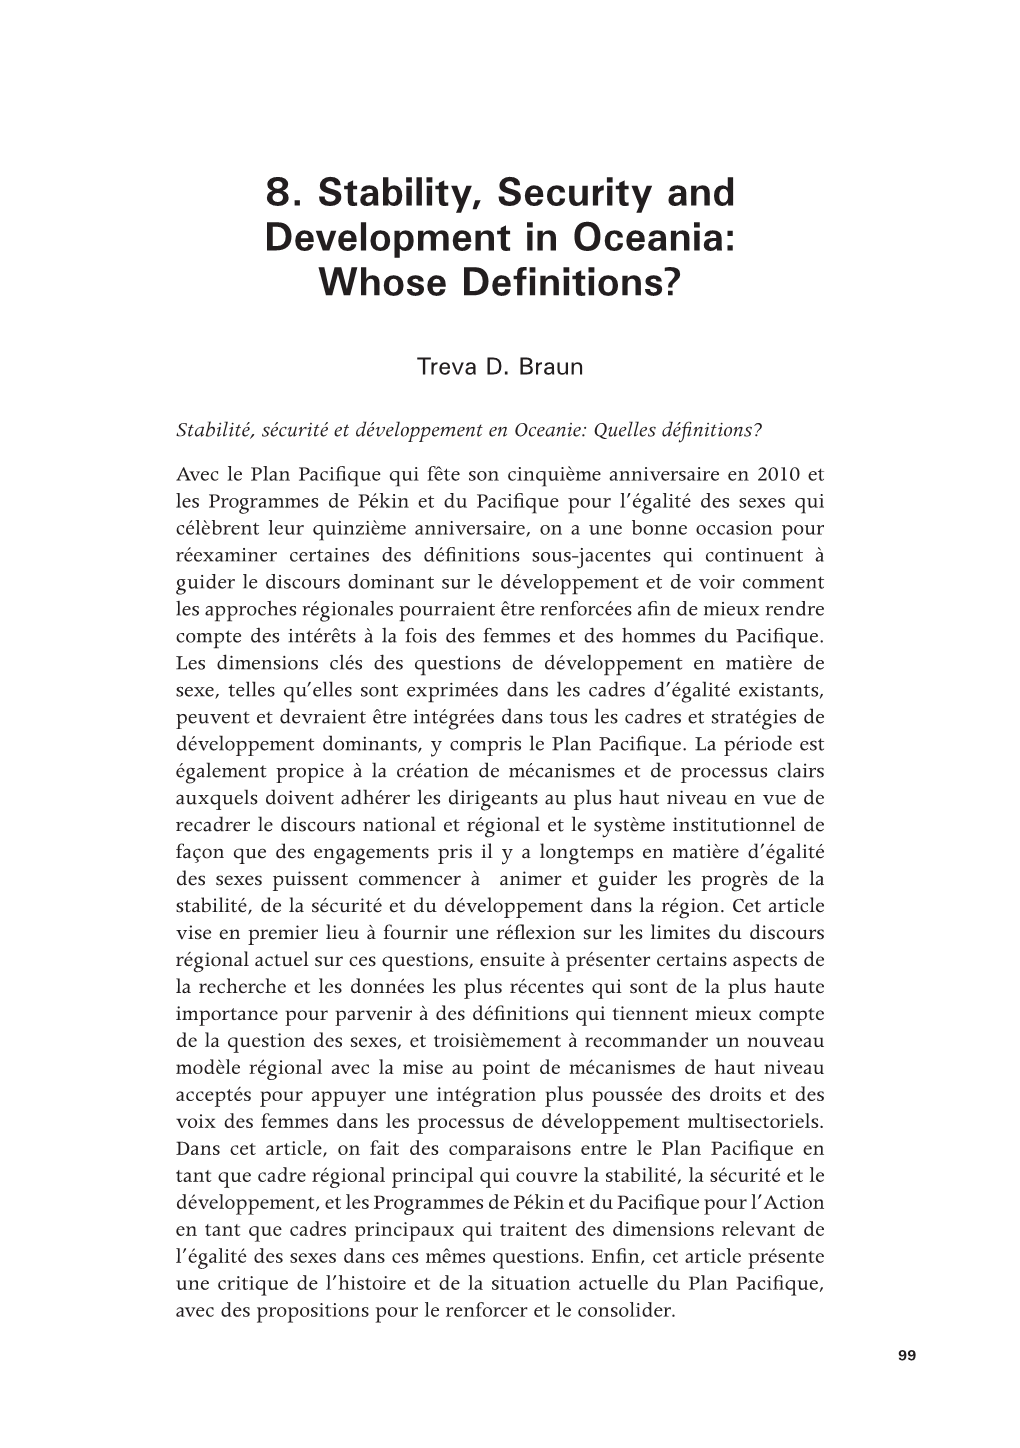 8. Stability, Security and Development in Oceania: Whose Definitions?